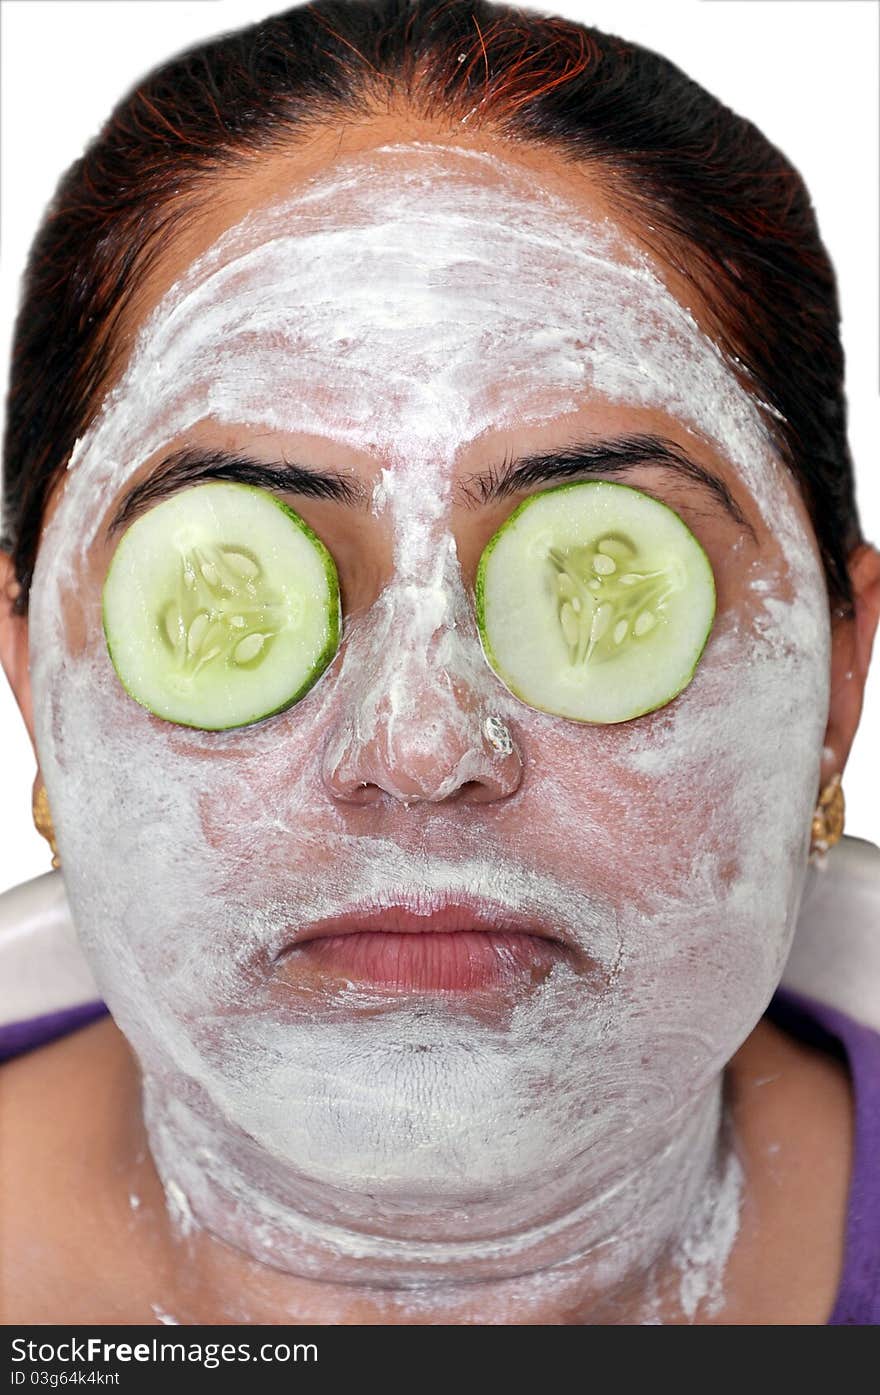 Lady applying a green cucumber face pack on his face.she is keeping cucumber slices on his eyes.it is good for face. Lady applying a green cucumber face pack on his face.she is keeping cucumber slices on his eyes.it is good for face.